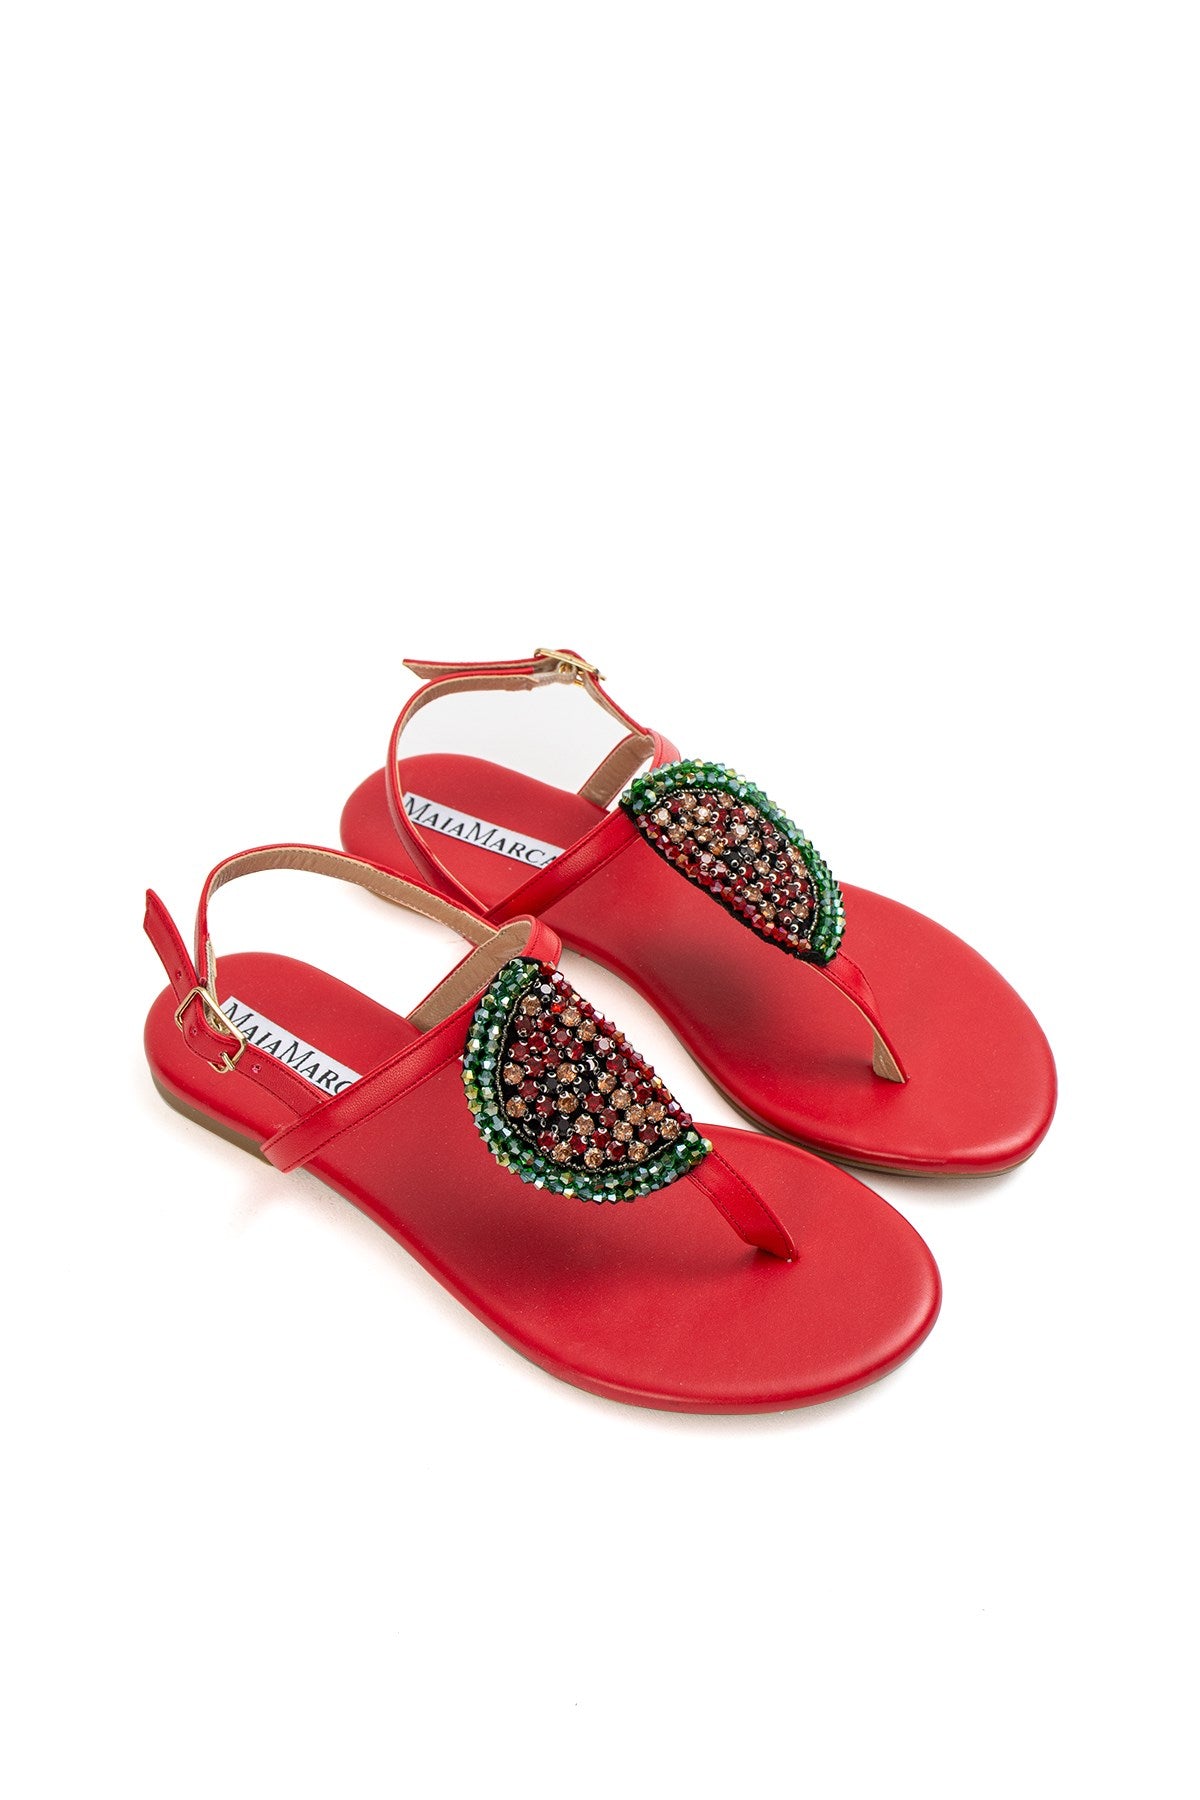 Istanbul Red Watermelon Sandals